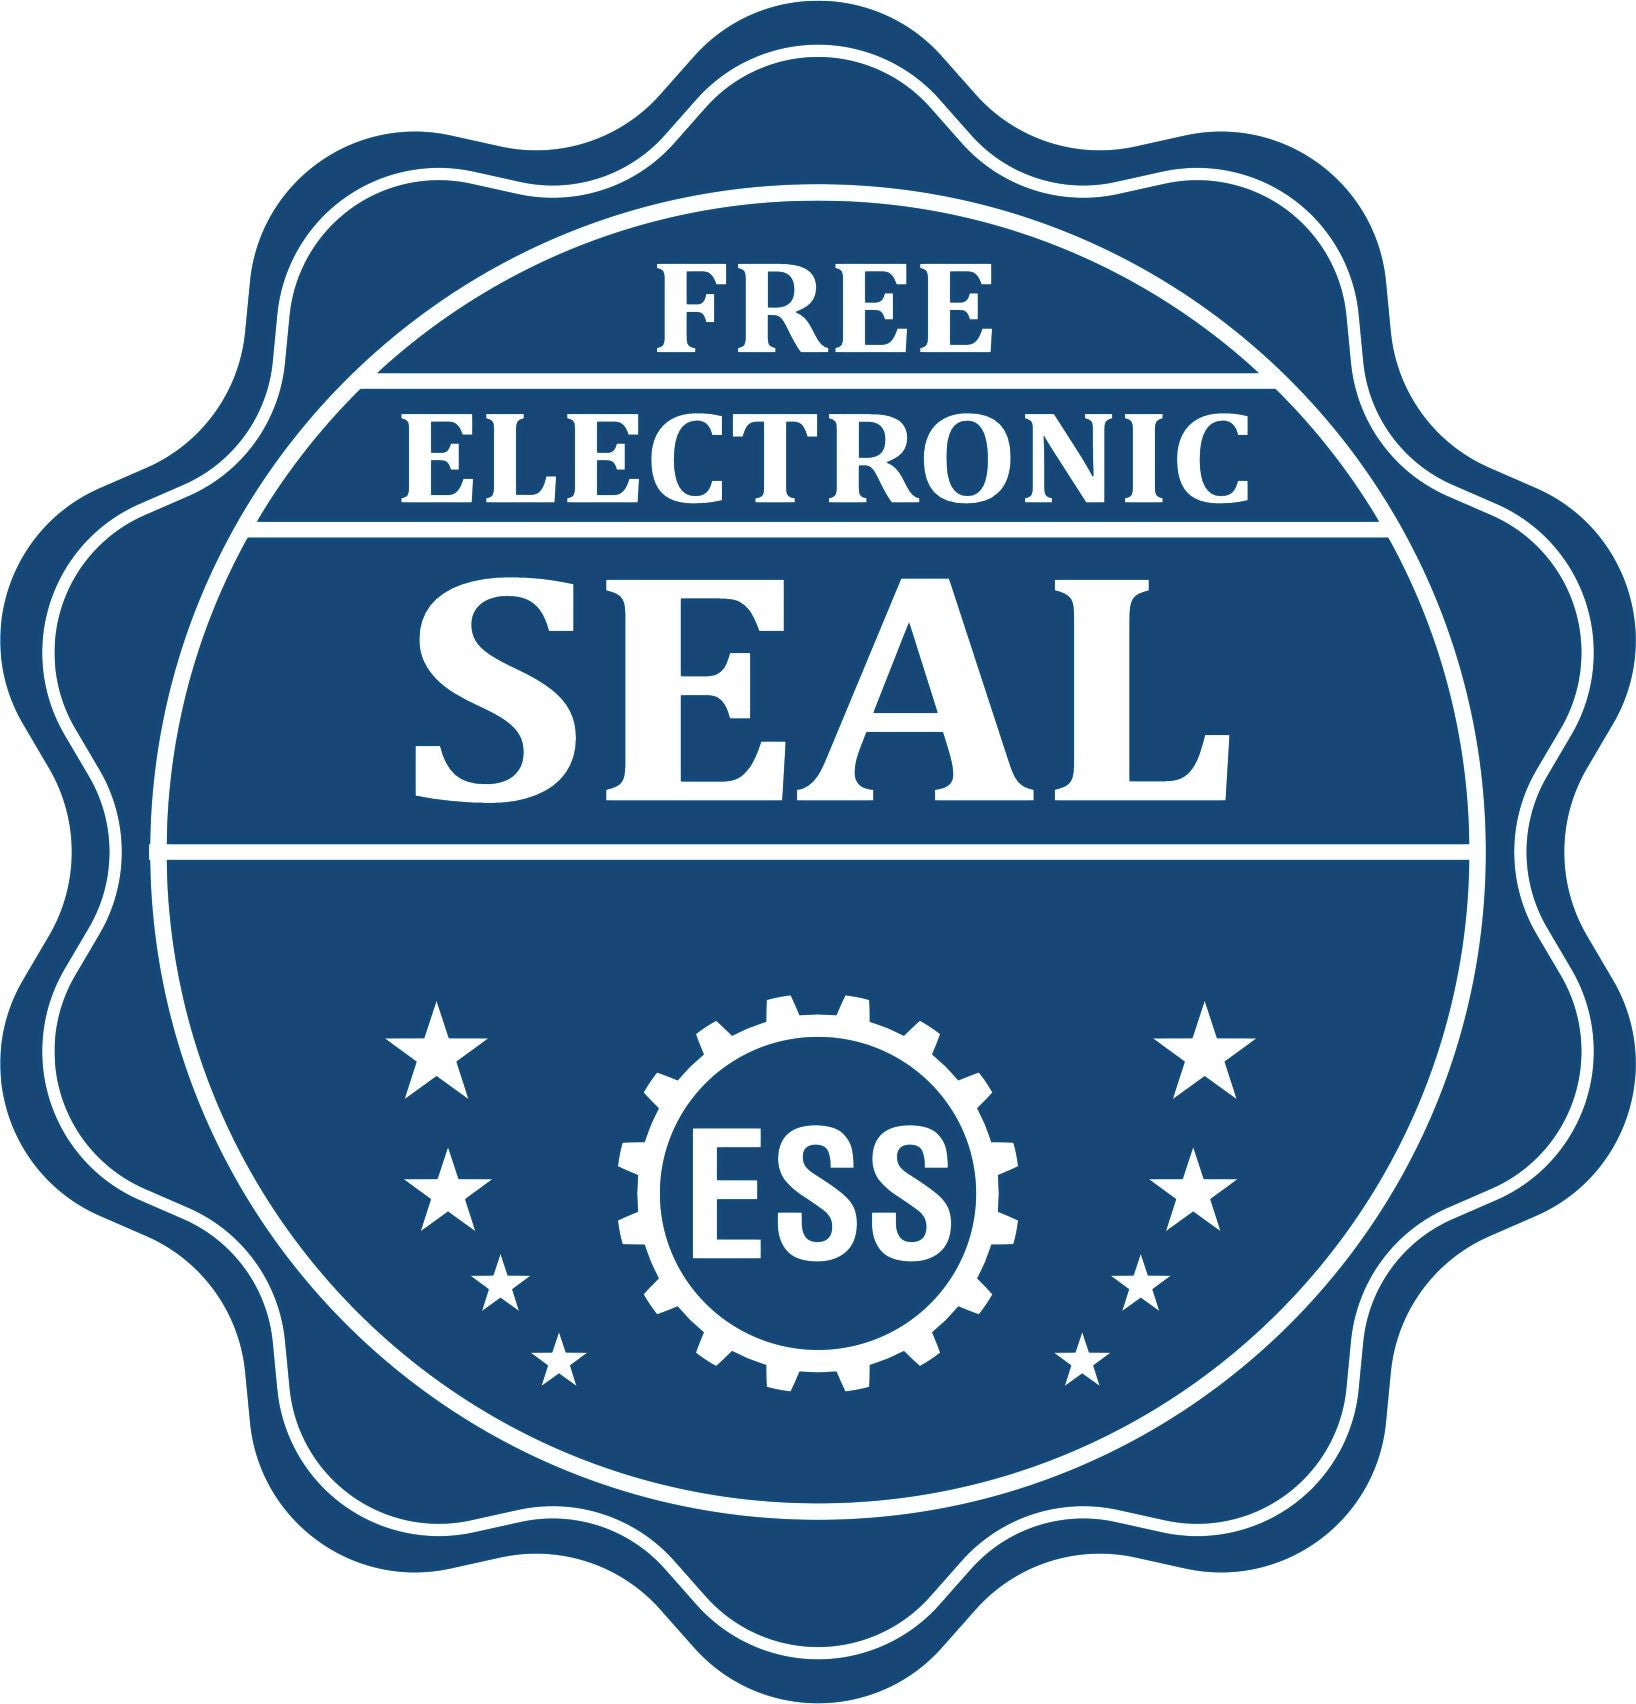 A badge showing a free electronic seal for the Soft Nevada Professional Engineer Seal with stars and the ESS gear on the emblem.